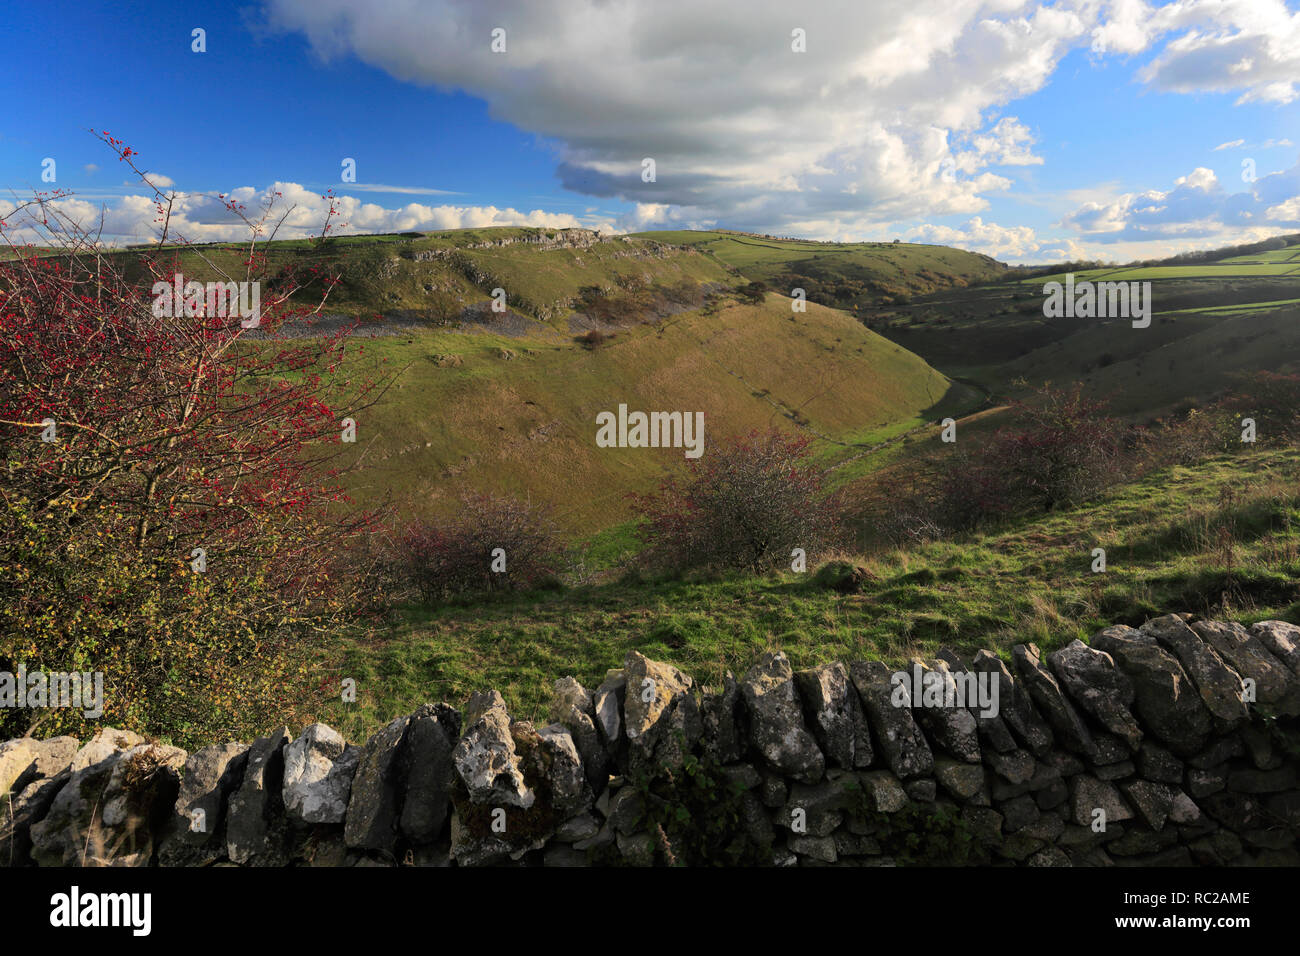 Autumn view through Tansley Dale with St Peters Stone, near Litton village, Peak District National Park, Derbyshire Dales, England, UK Stock Photo